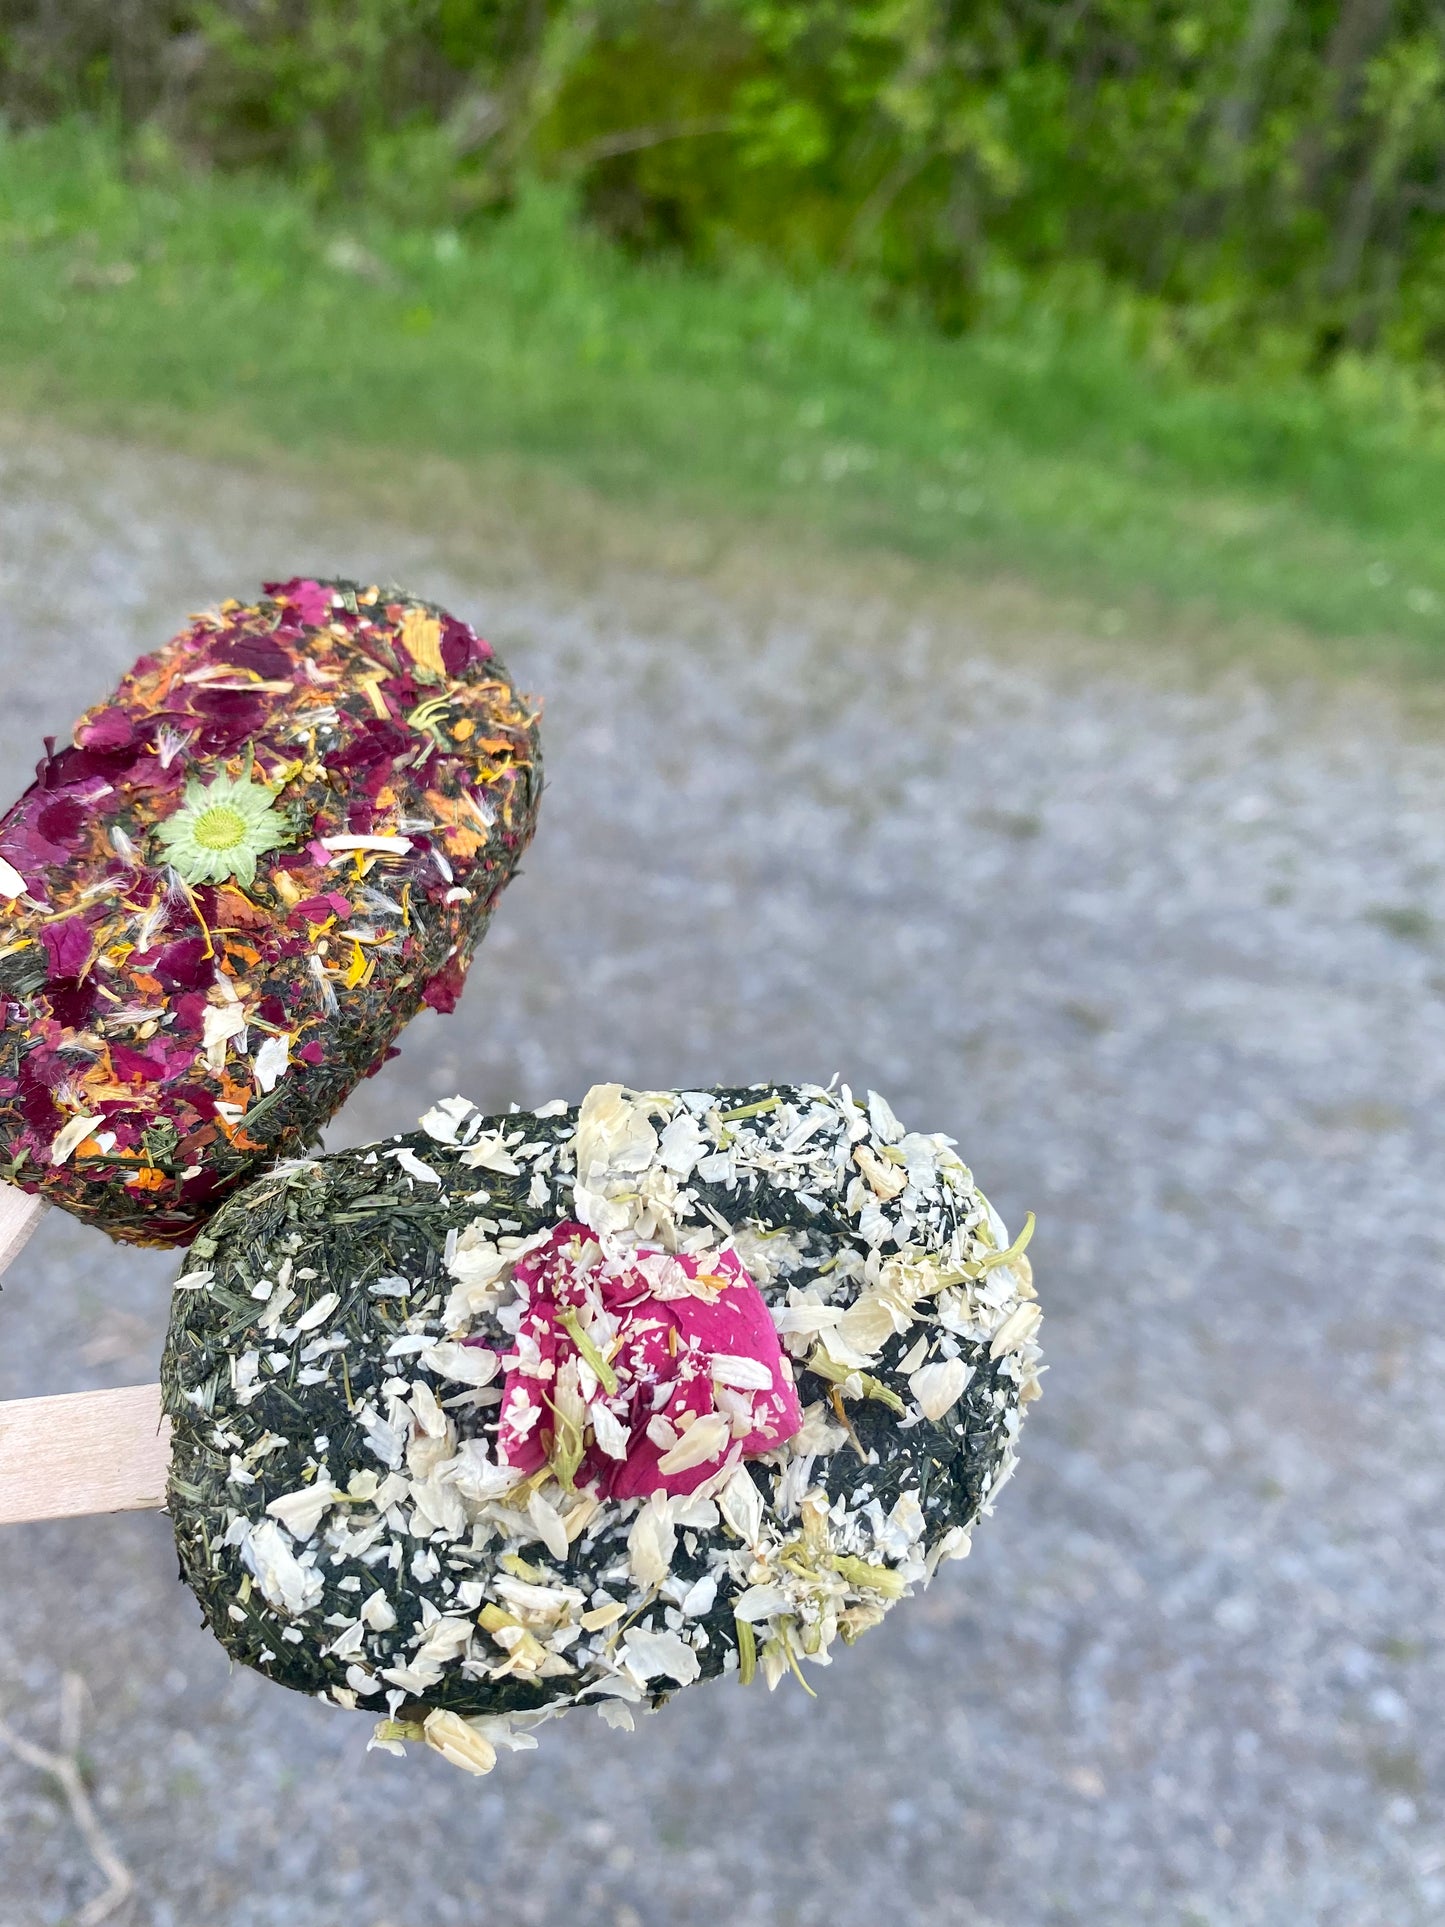 Popsicle treats, fresh grass - Product of Quebec